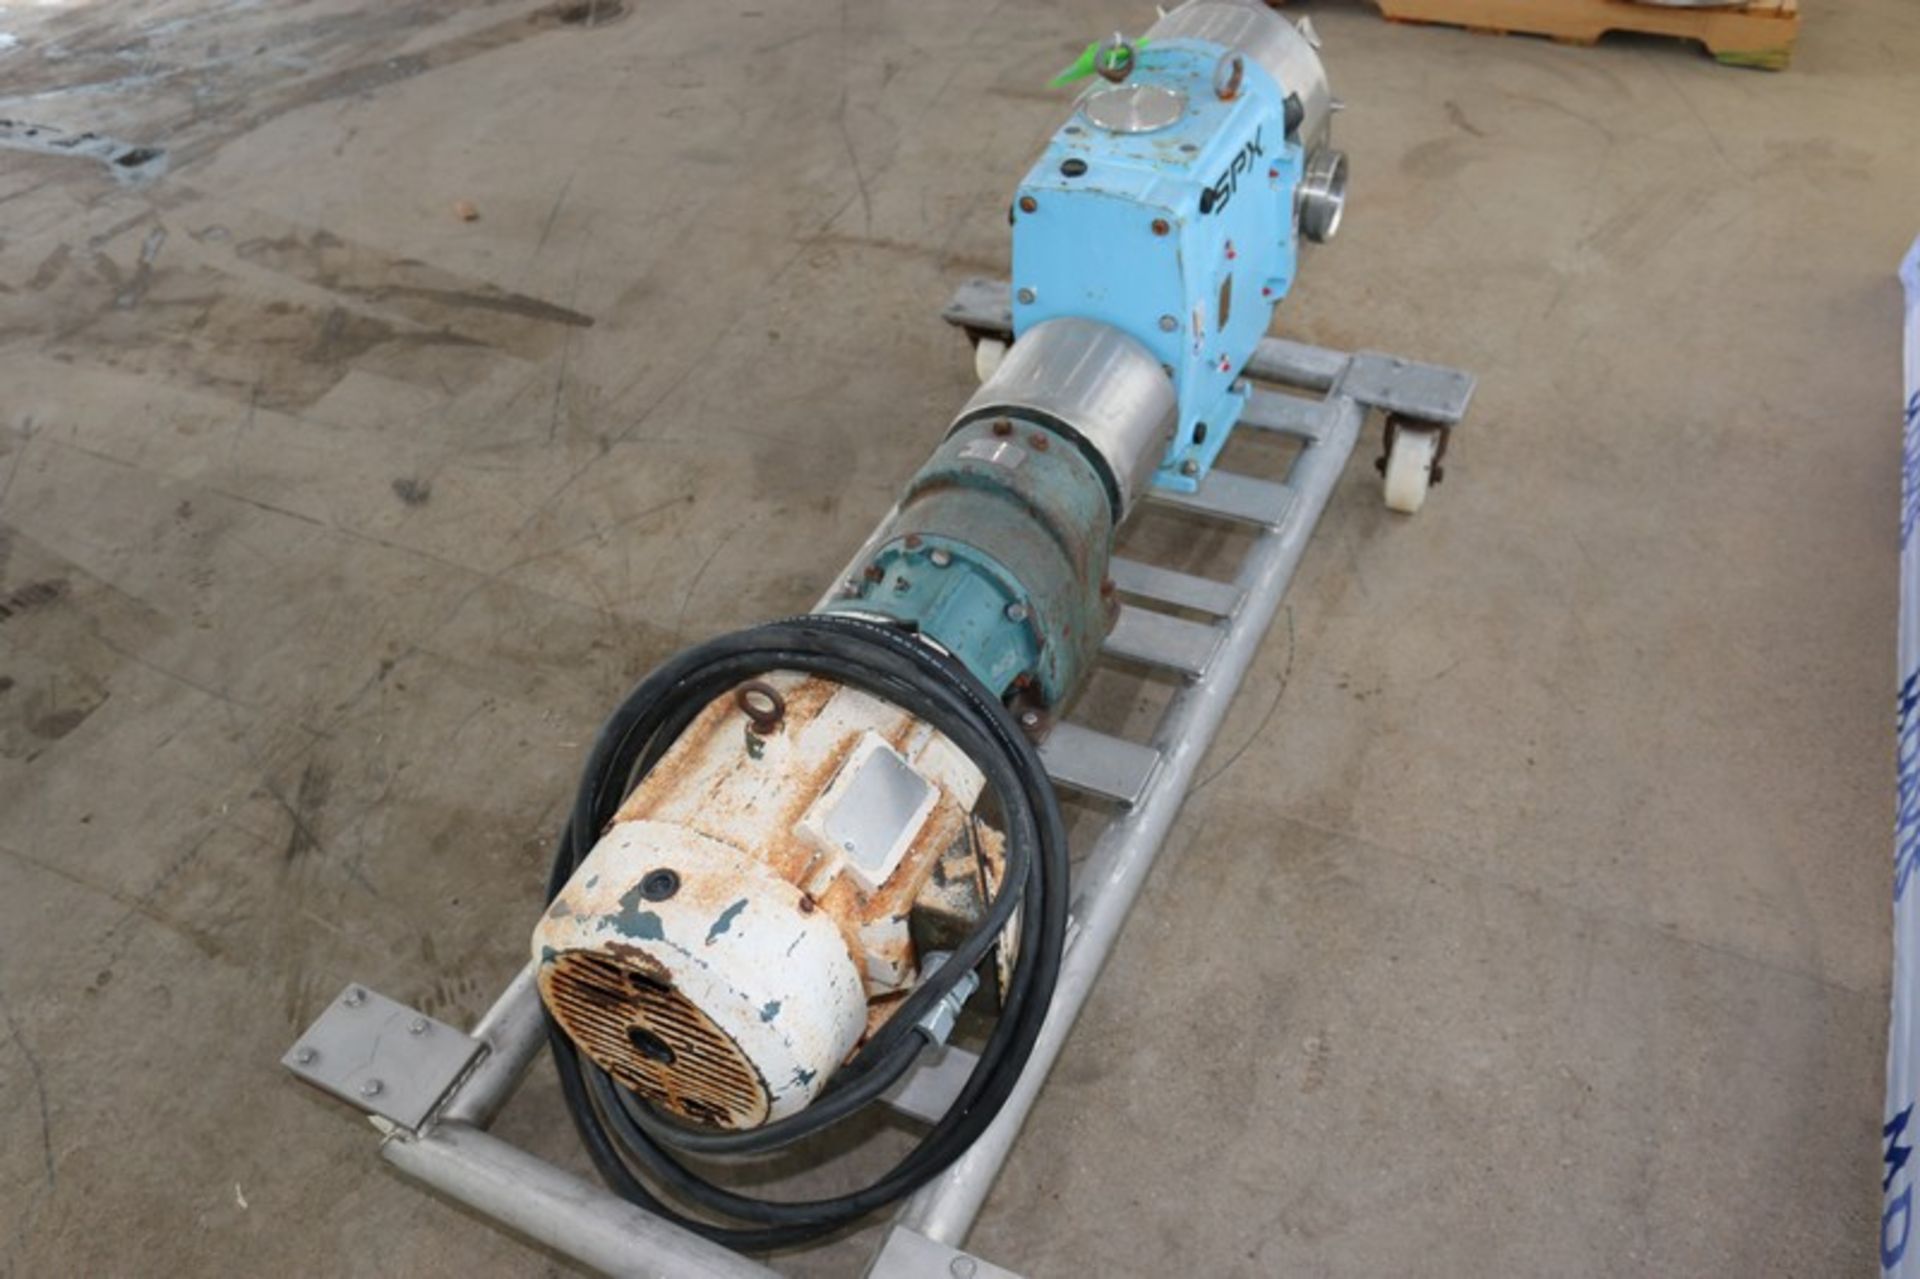 2015 SPX 10 hp Positive Displacement Pump,M/N 220U1, S/N 30465998 R2-3, with Reliance 1755 RPM - Image 7 of 8